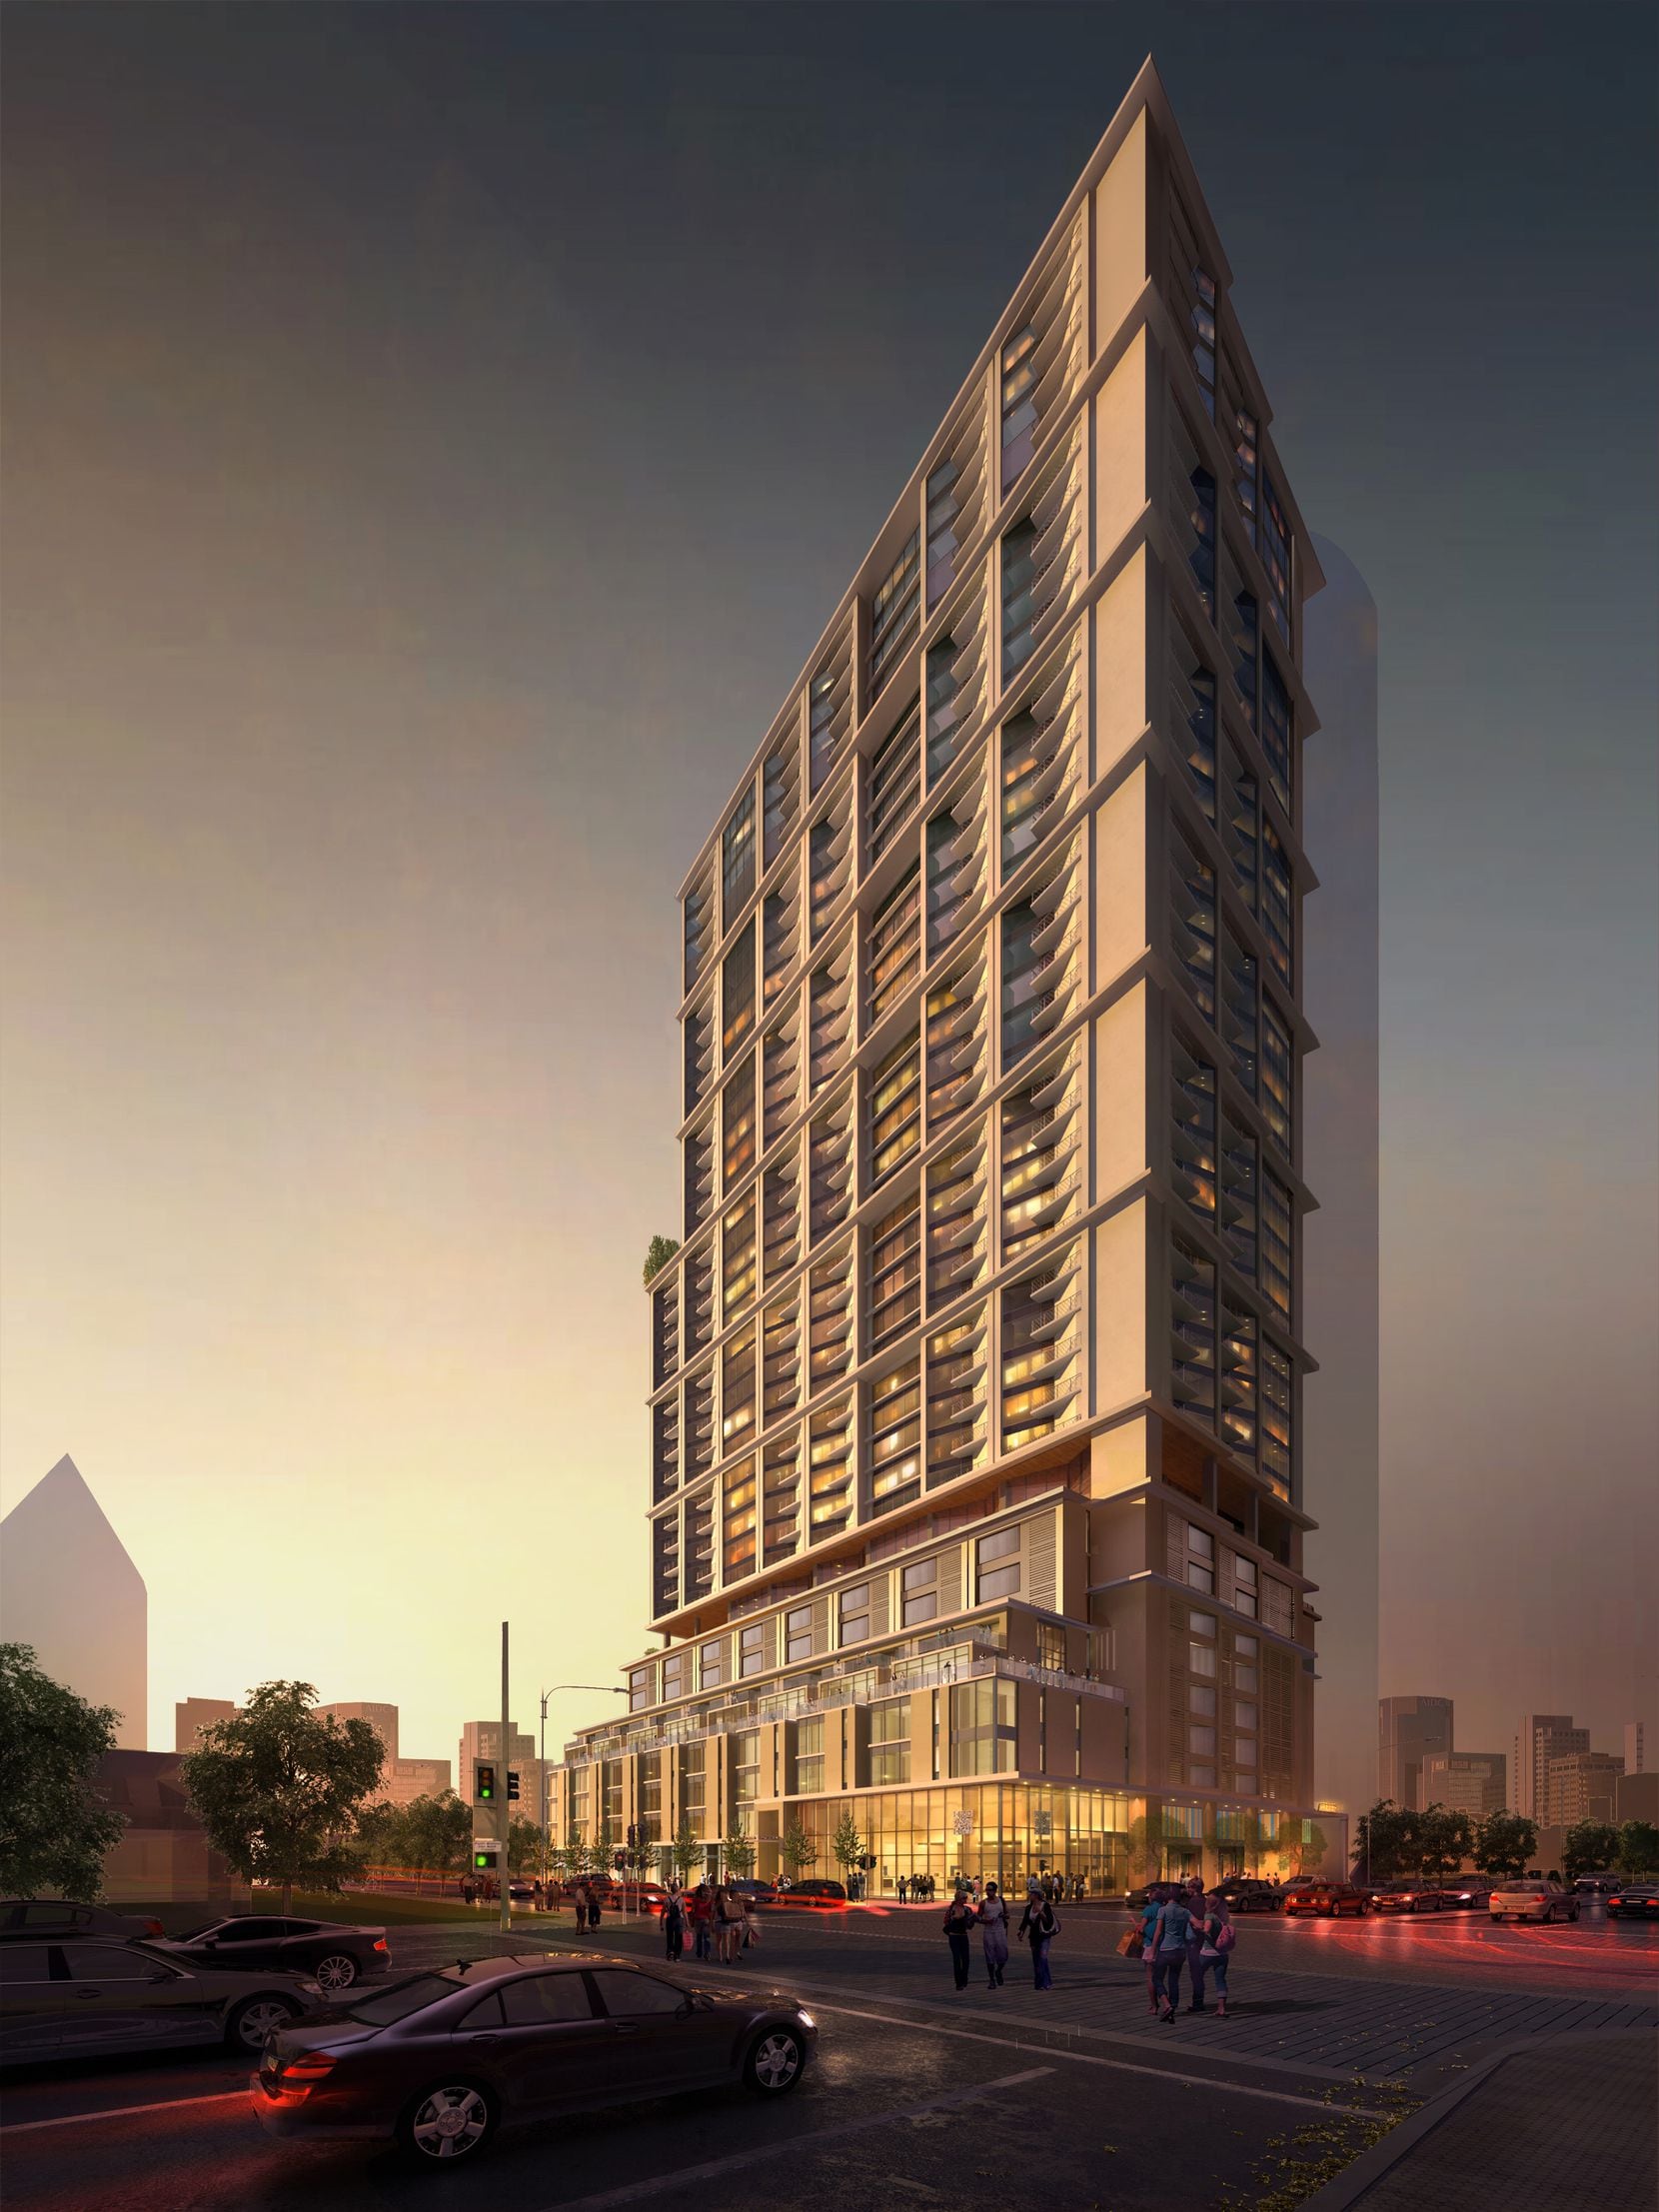 The 41-story Atelier apartments in downtown Dallas is one of the tallest buildings under...